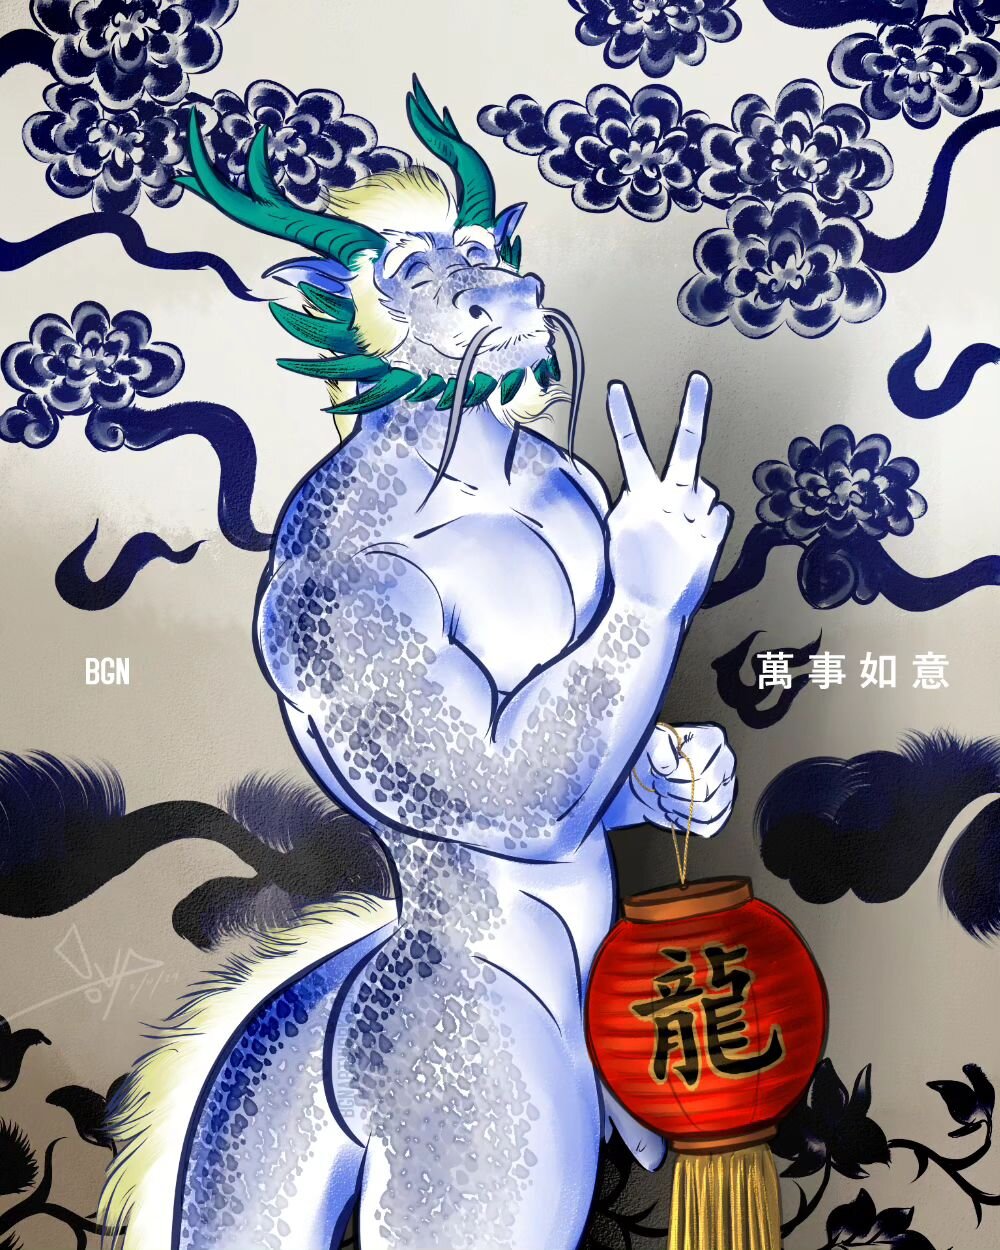 May all your hopes be fulfilled... 🎆🎉🐉Happy Lunar New Year!🐉🎉🎆 #anthro #dragon #anthroart